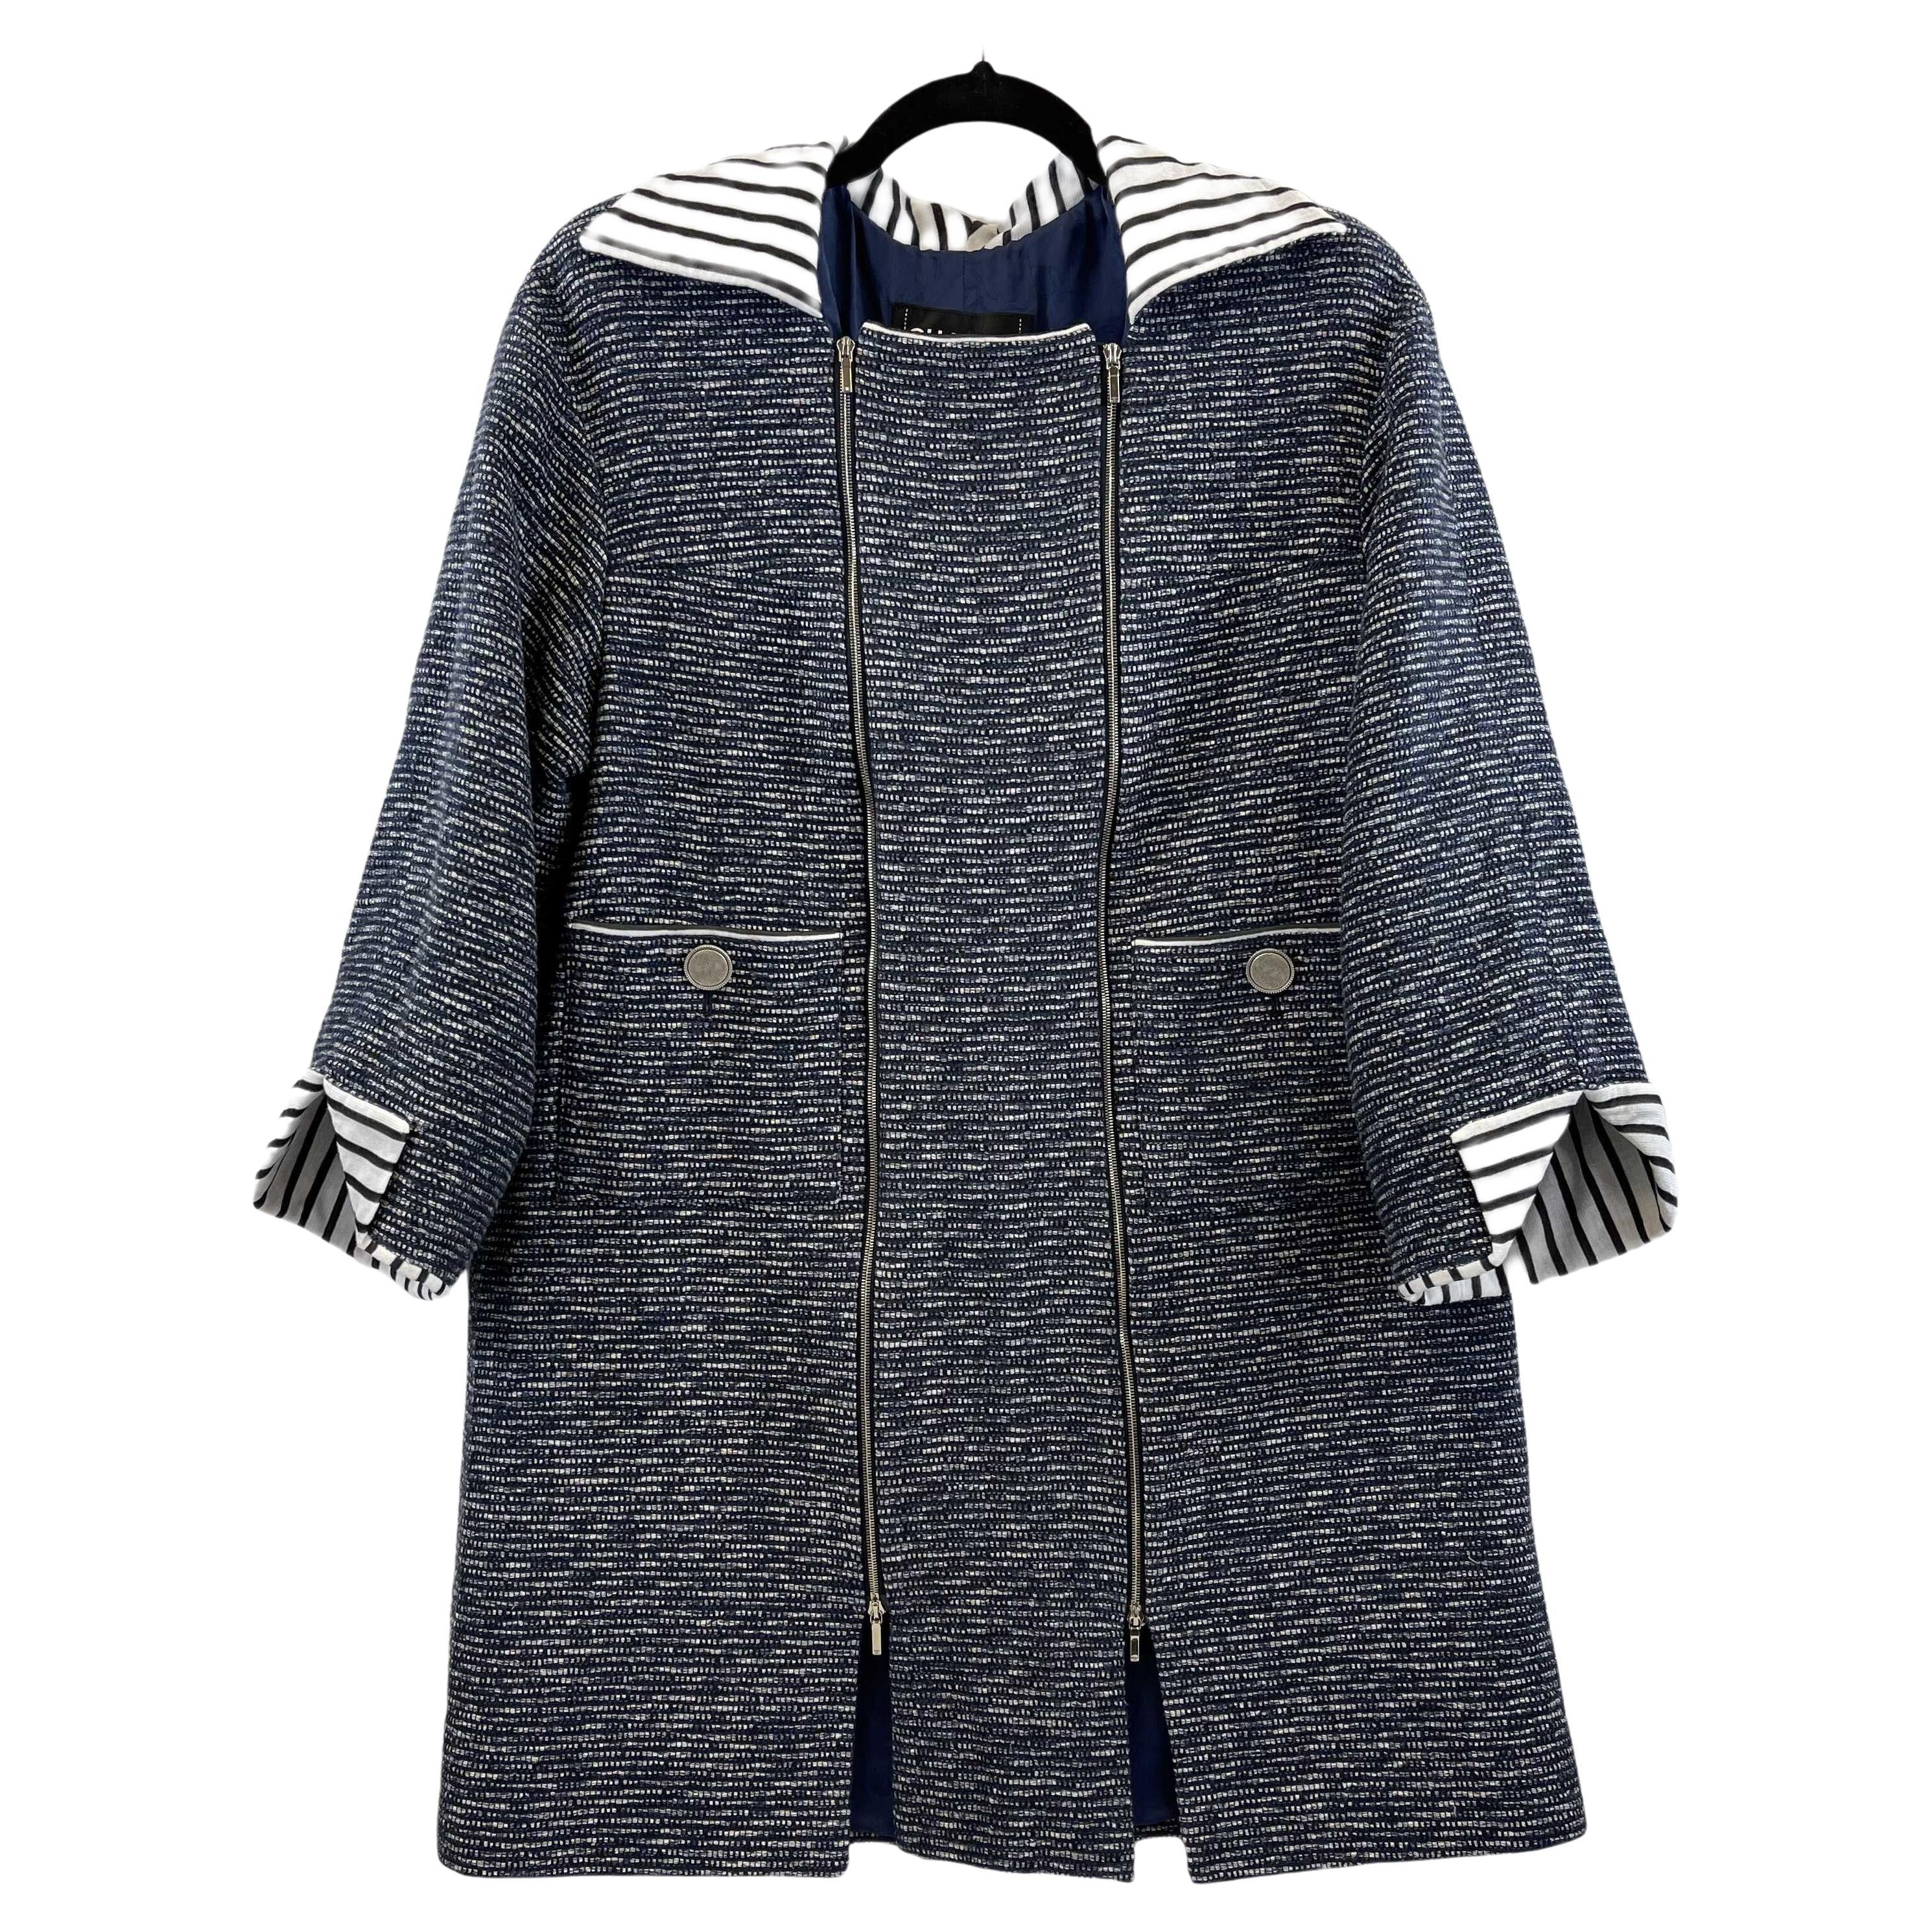 CHANEL- Spring 2017 Fantasy Tweed Coat - Navy & White - 38 US 6 NWT For Sale